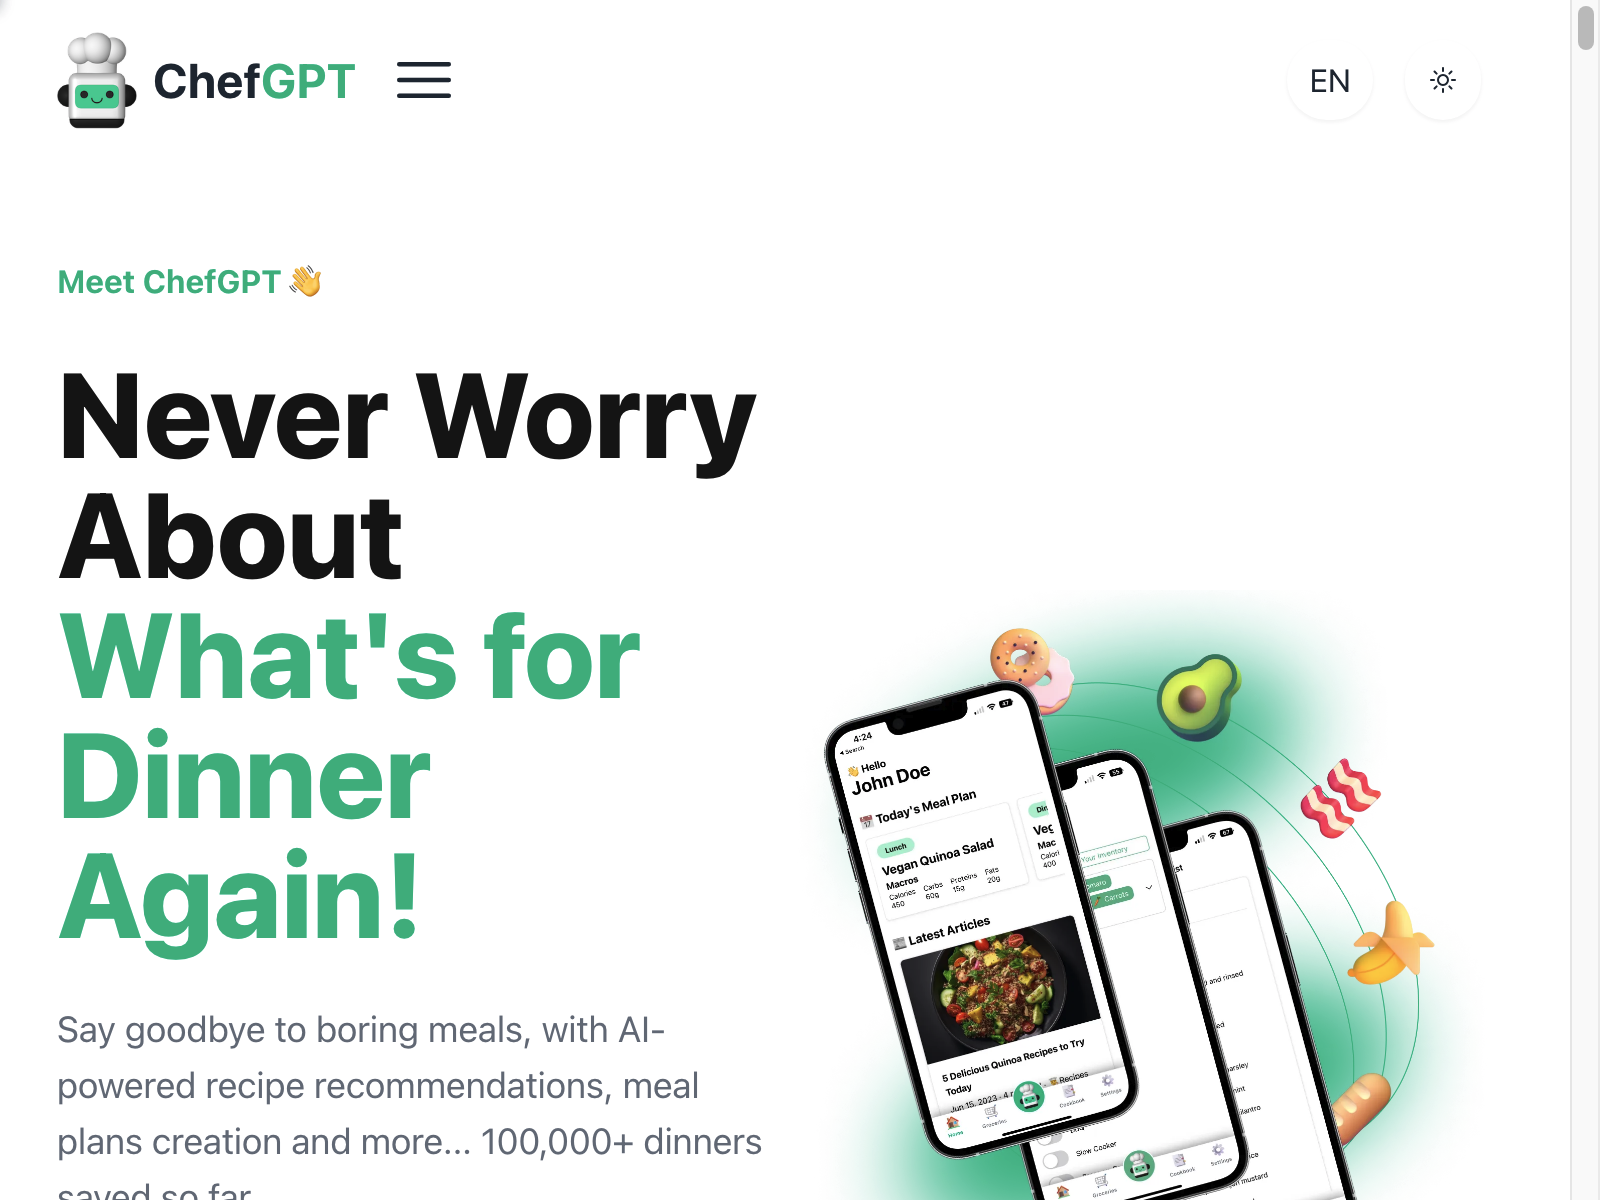 chefgpt Review: Pros, Cons, Alternatives